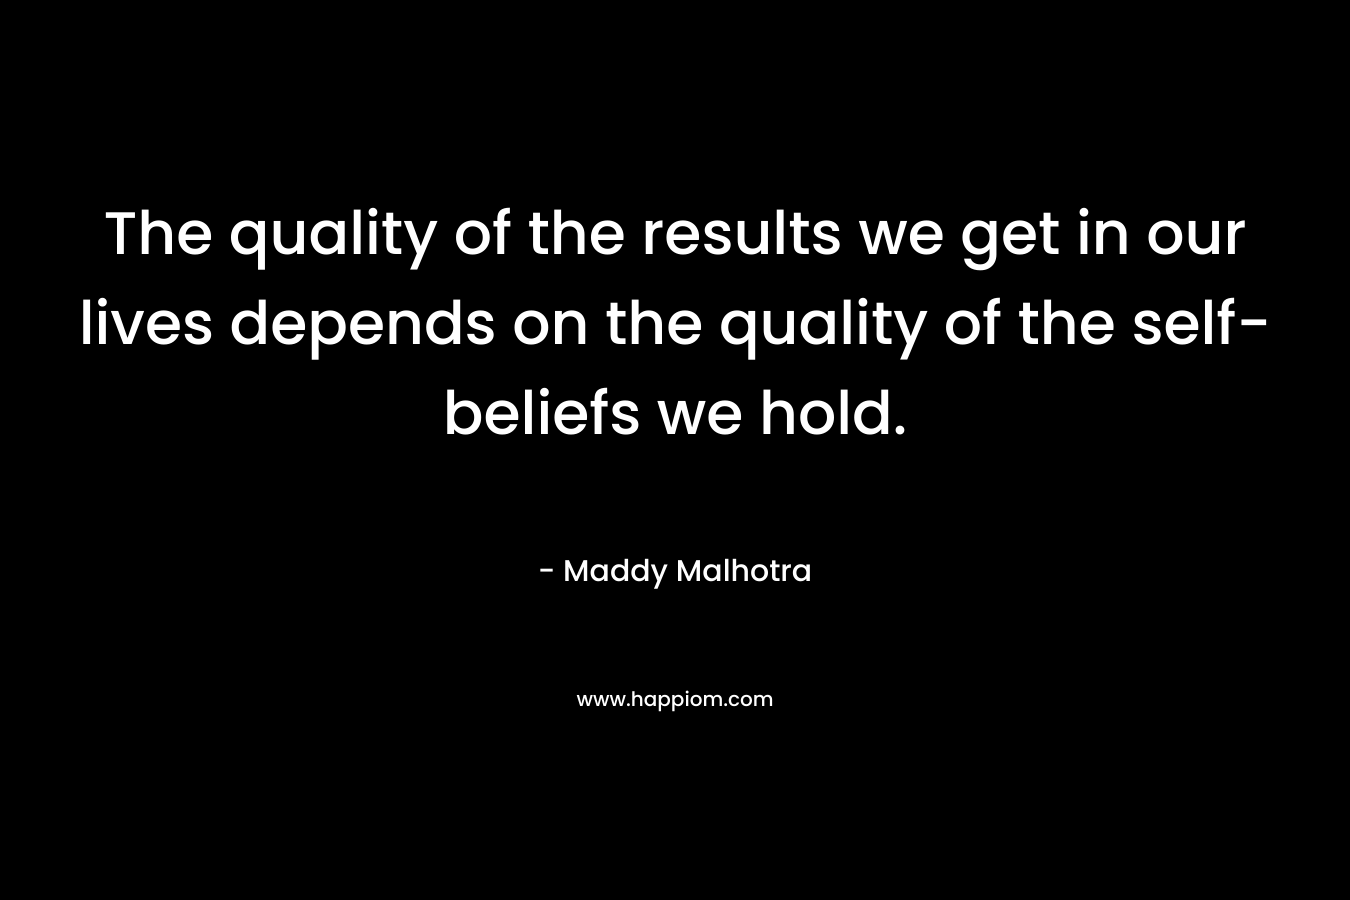 The quality of the results we get in our lives depends on the quality of the self-beliefs we hold. – Maddy Malhotra